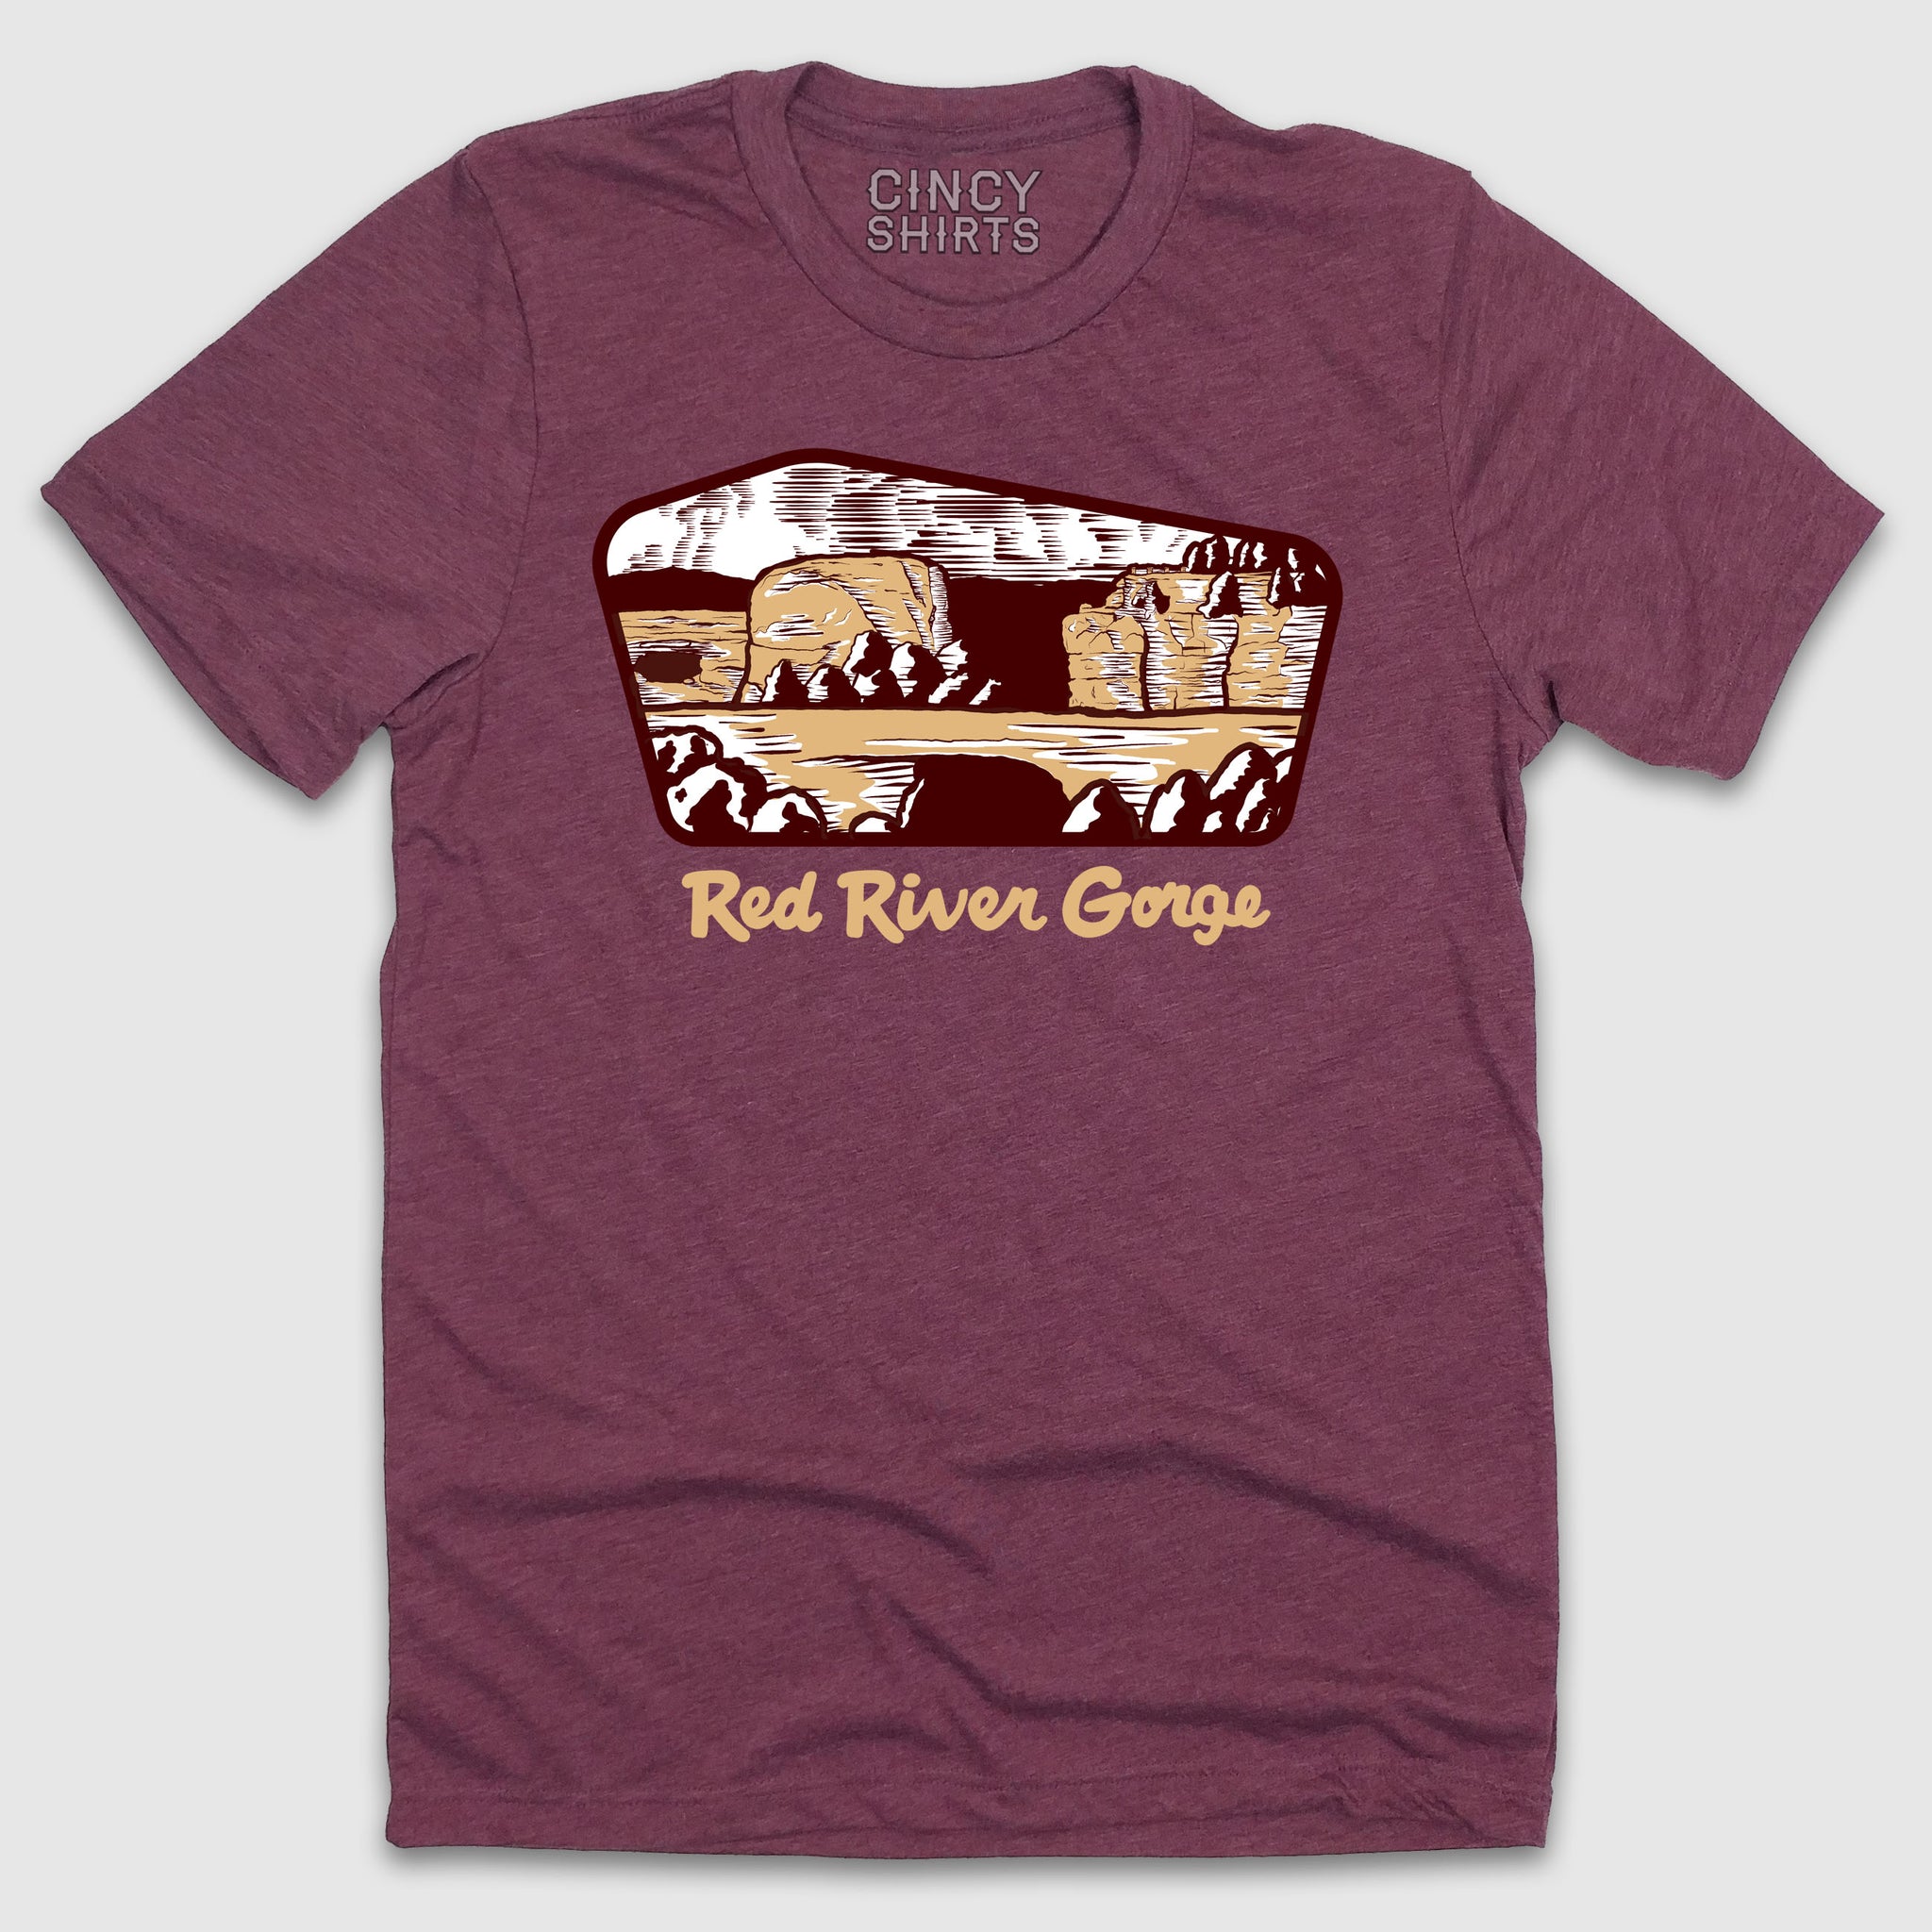 red river gorge t shirt